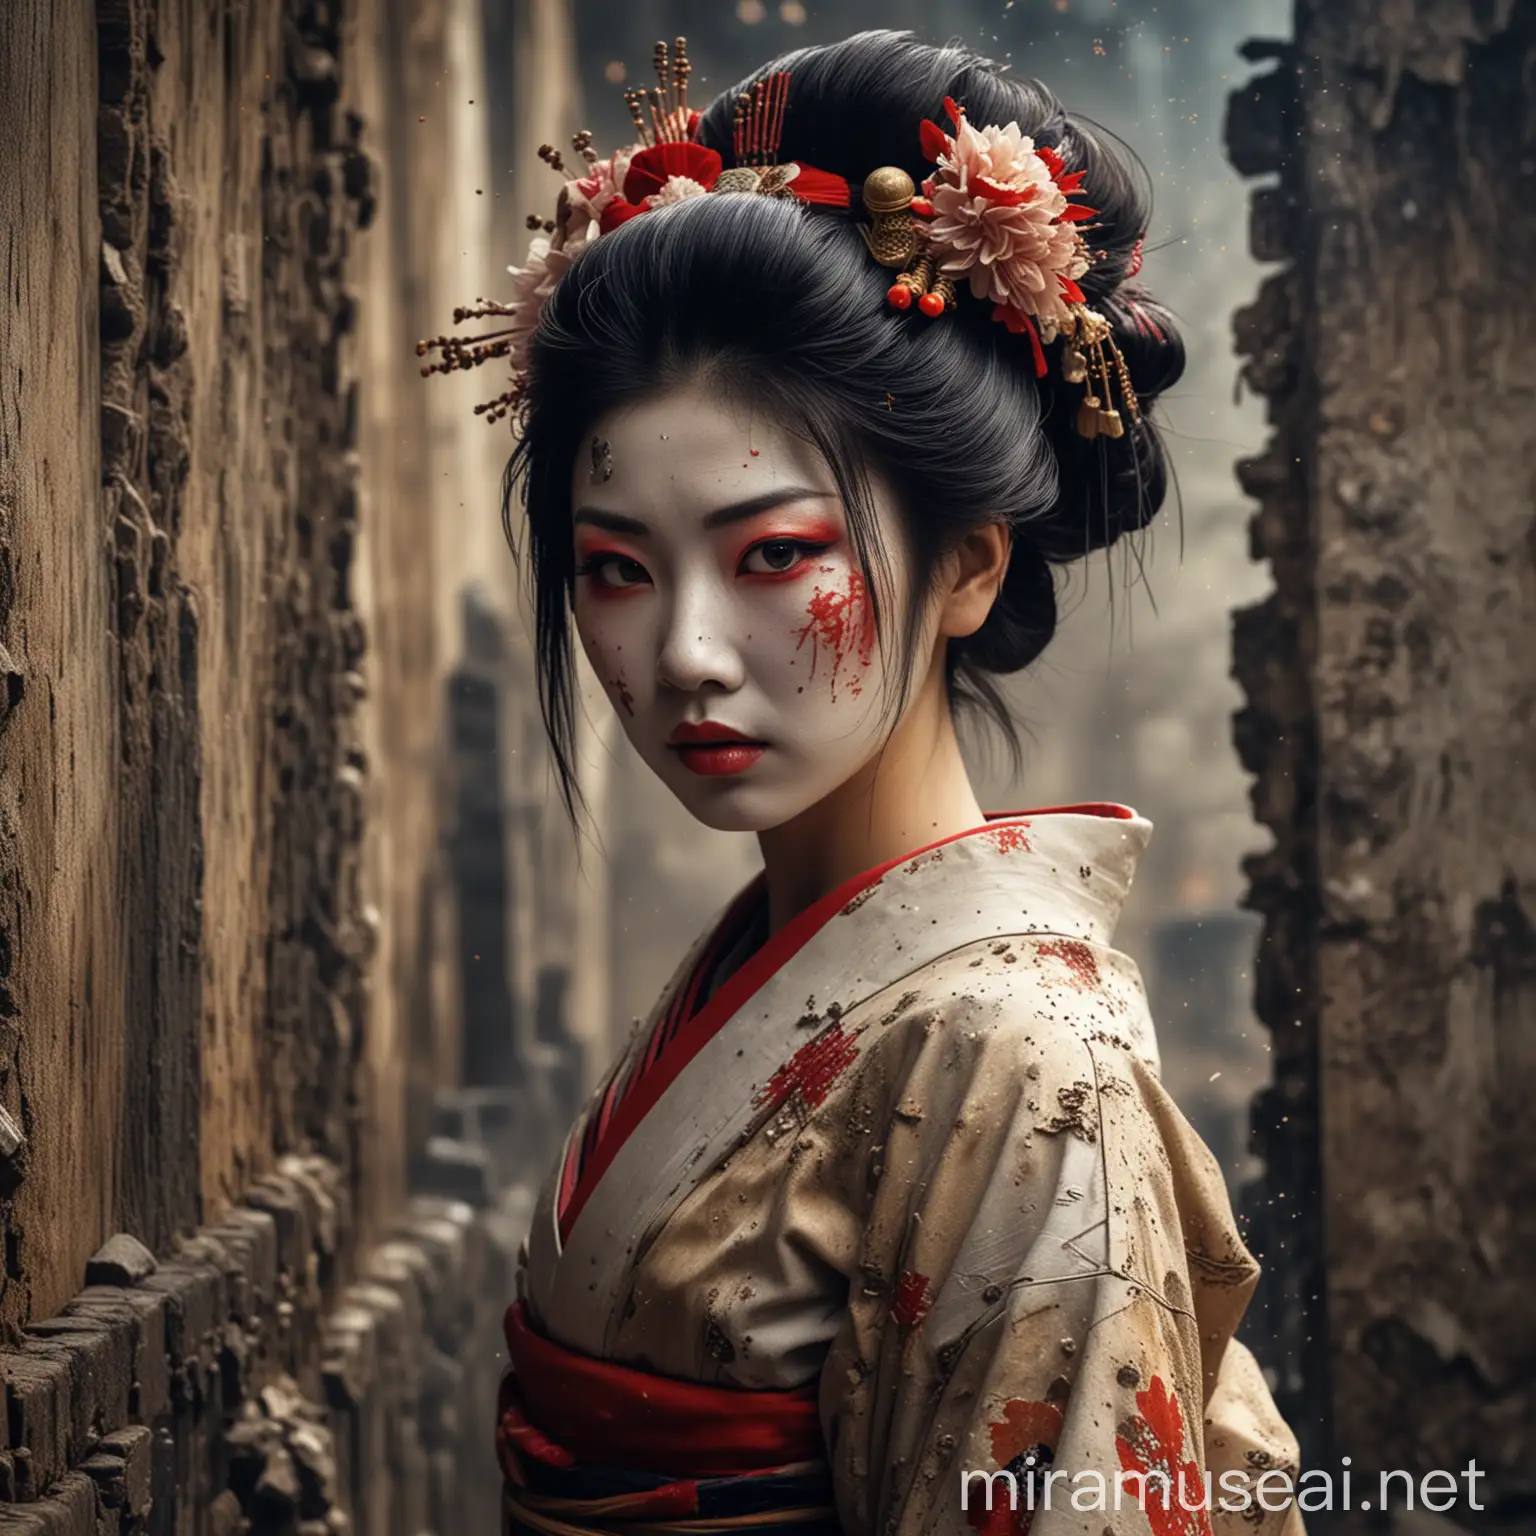 Graceful Geisha Emerging from Ruins with Calm Determination